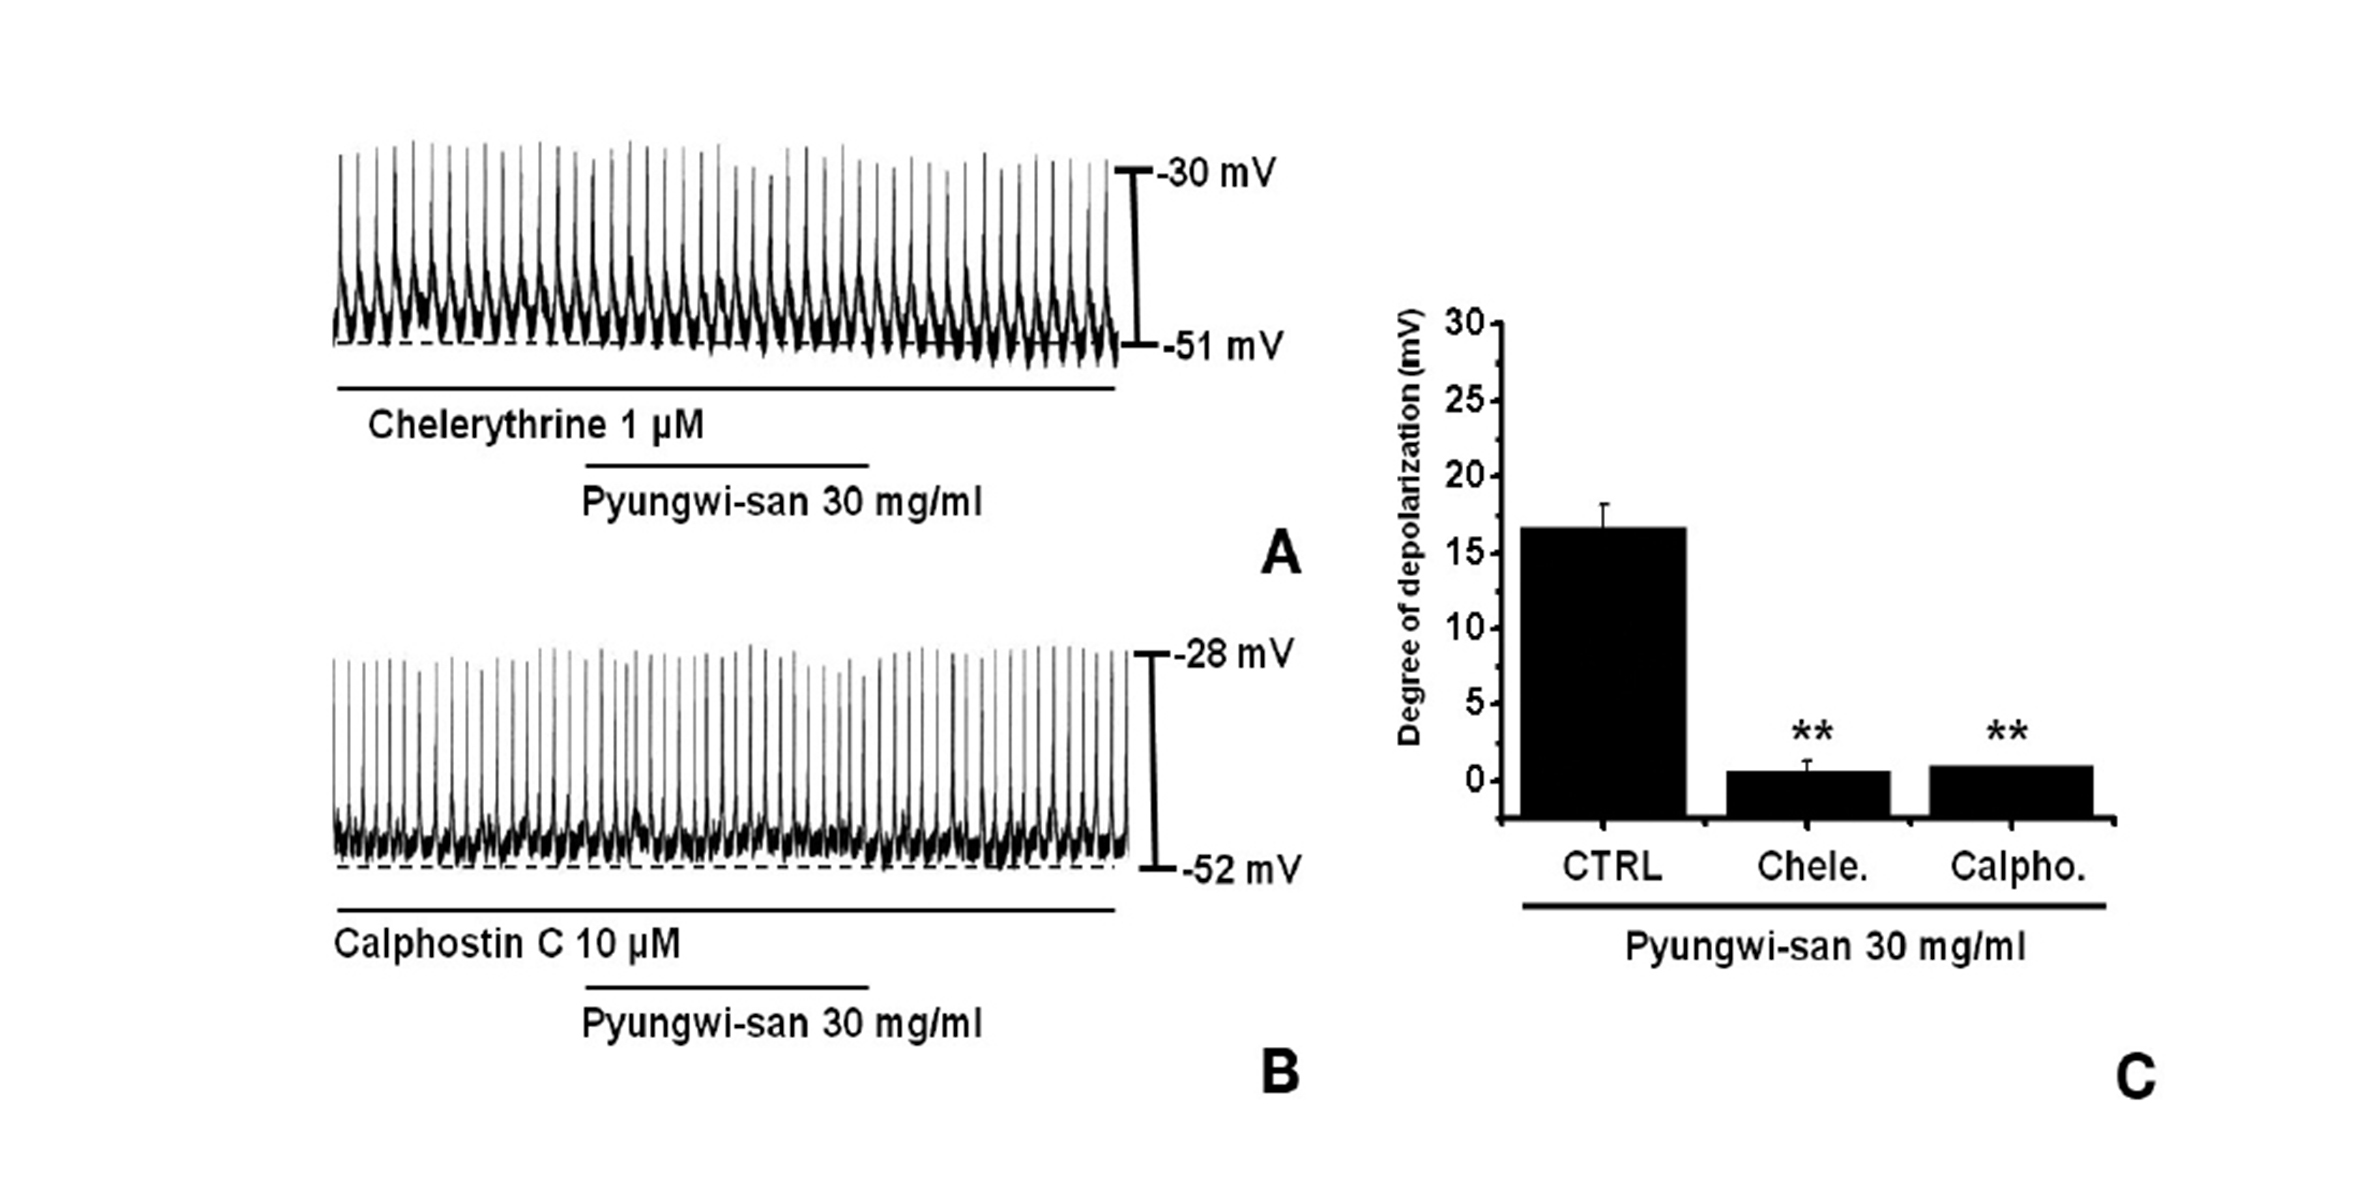 Effects of chelerythrine or calphostin C, an inhibitor of protein kinase C, on PWS-induced pacemaker potentials in cultured ICCs of the murine small intestine. A, B: ICCs were isolated from the Balb/c small intestine after primary cell culture for various doses of PSW (5 to 50 mg/mL) and the clamping mode (I = 0). Pacemaker potentials of ICCs exposed to PWS (30 mg/ml) in the presence of chelerythrine (1 ㎛) or calphostin C (10 ㎛) are shown. Under these conditions, PWS did not cause membrane depolarizations. C: Summary of the responses to PWS in the presence of chelerythrine or calphostin C. Bars represent the mean values ± SE **(P < 0.01) Significantly different from the untreated control. CTRL: Control.